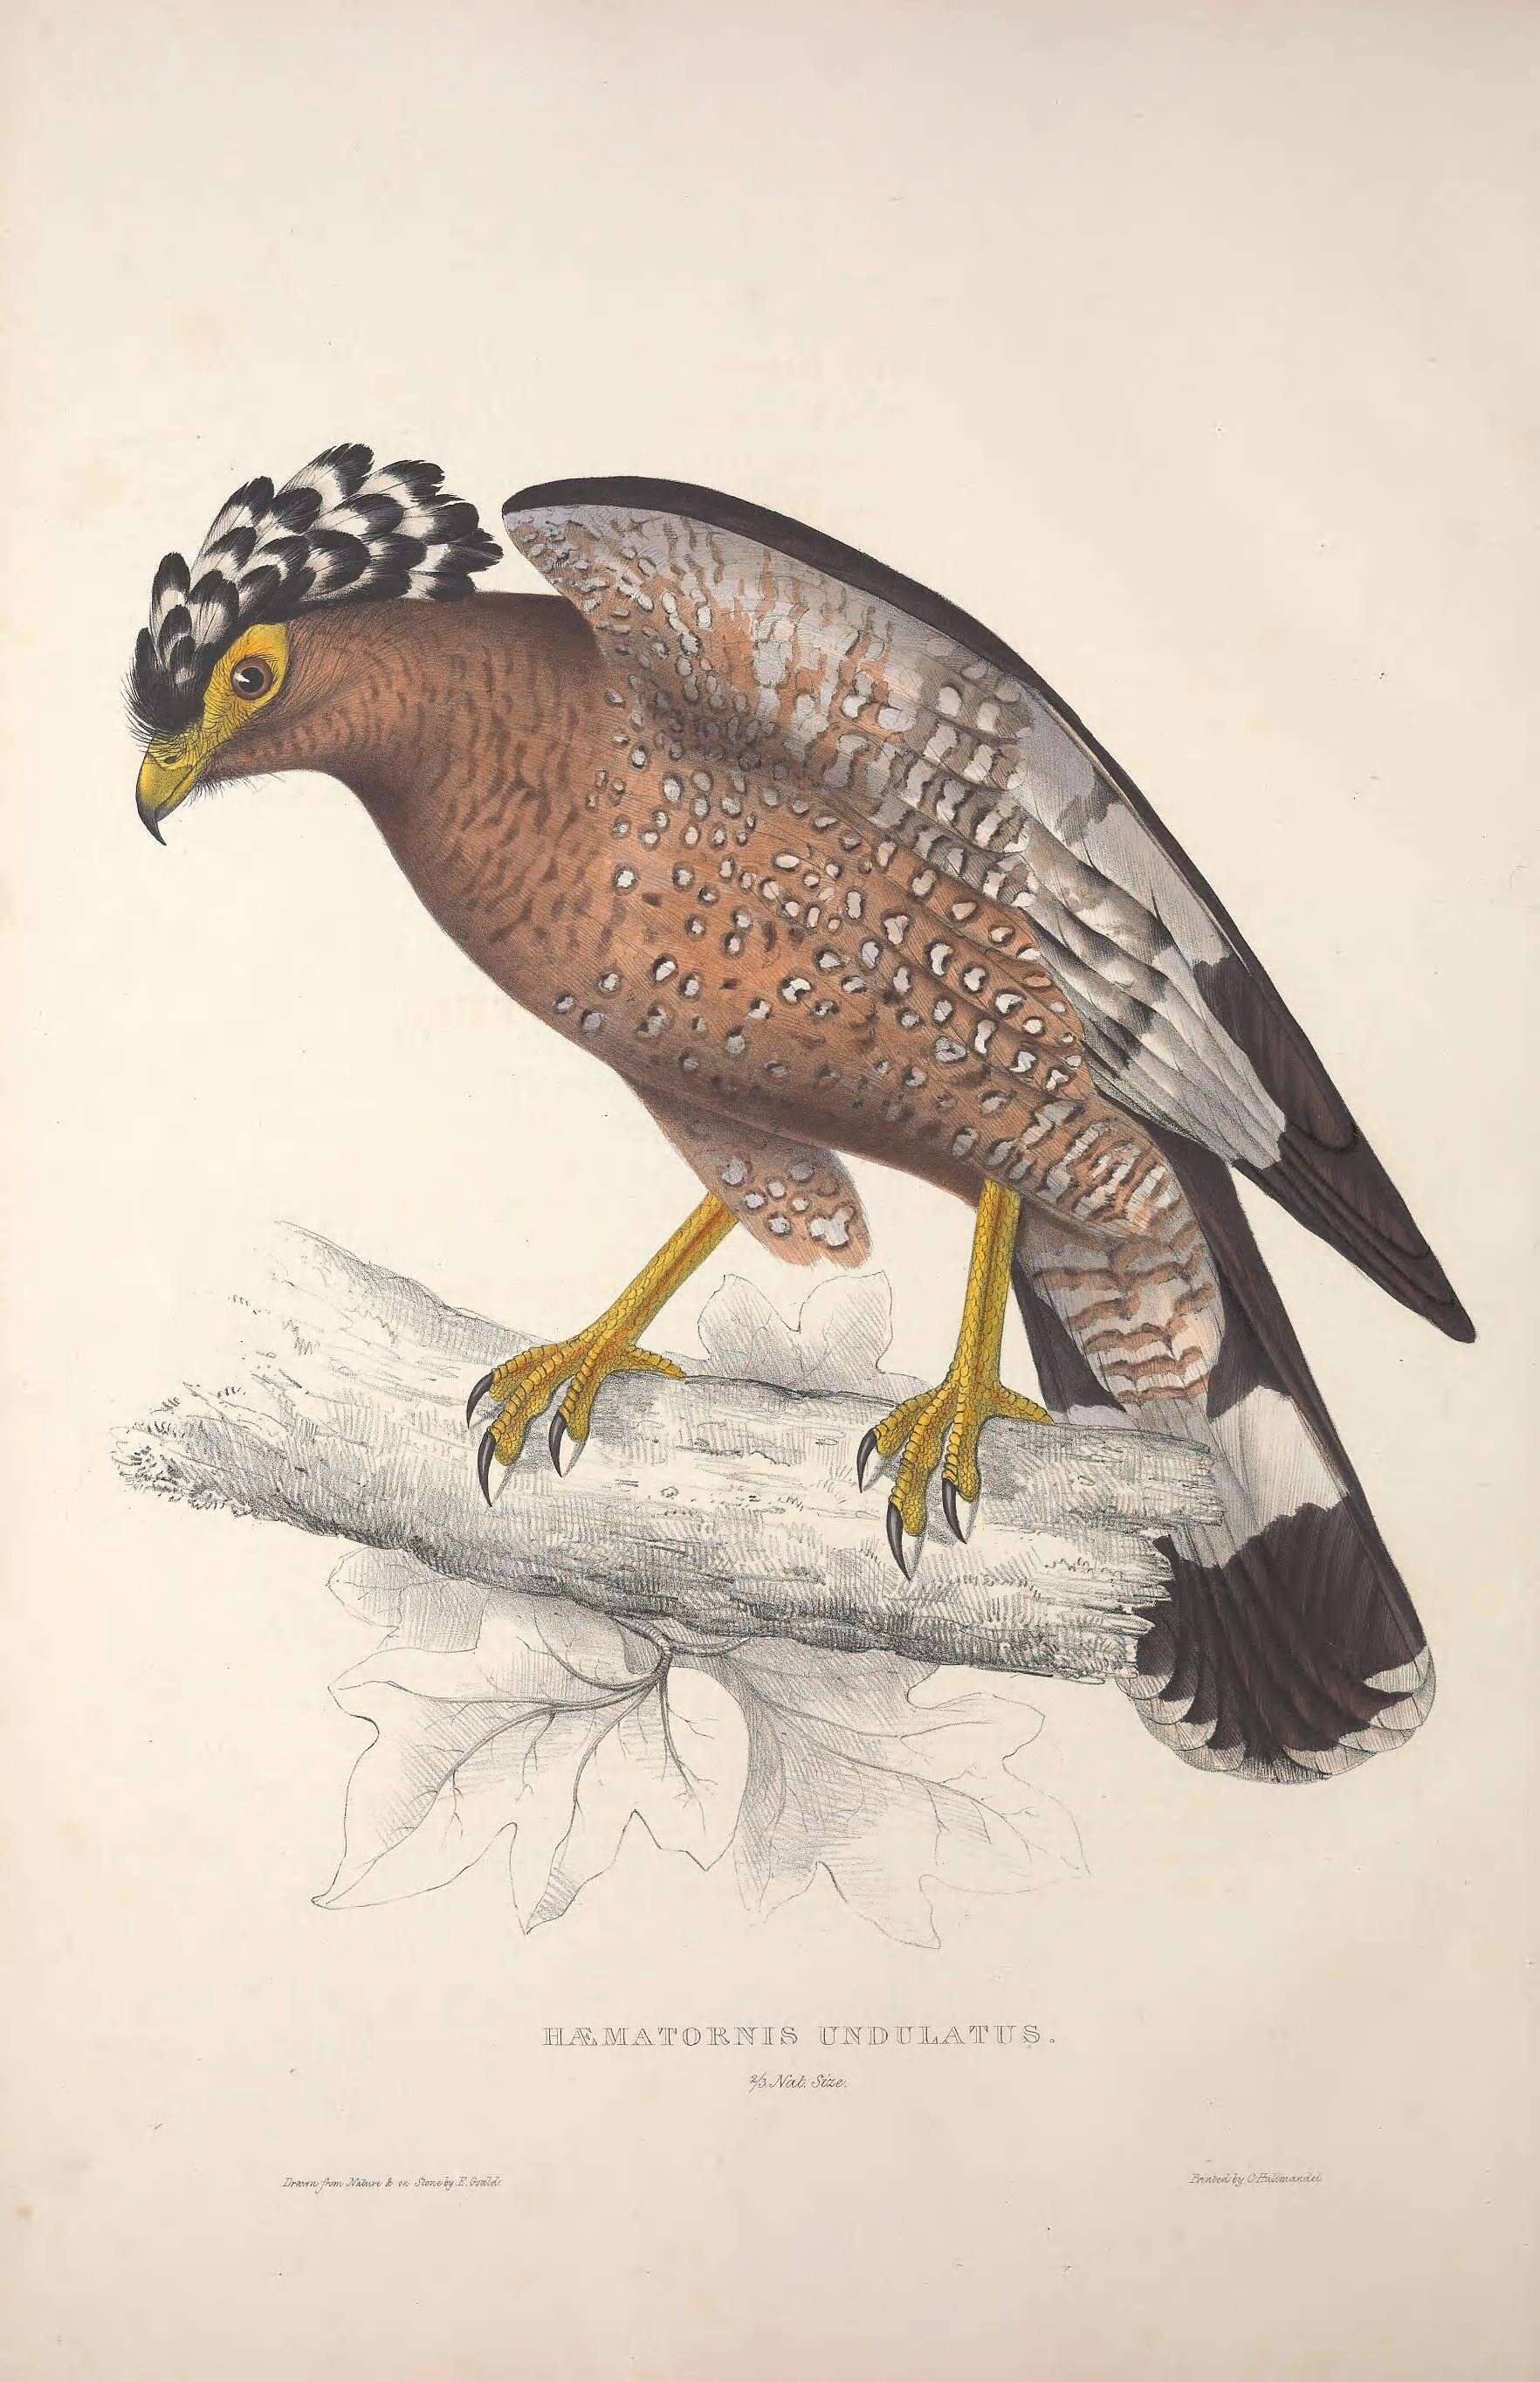 Image of Crested Serpent Eagle